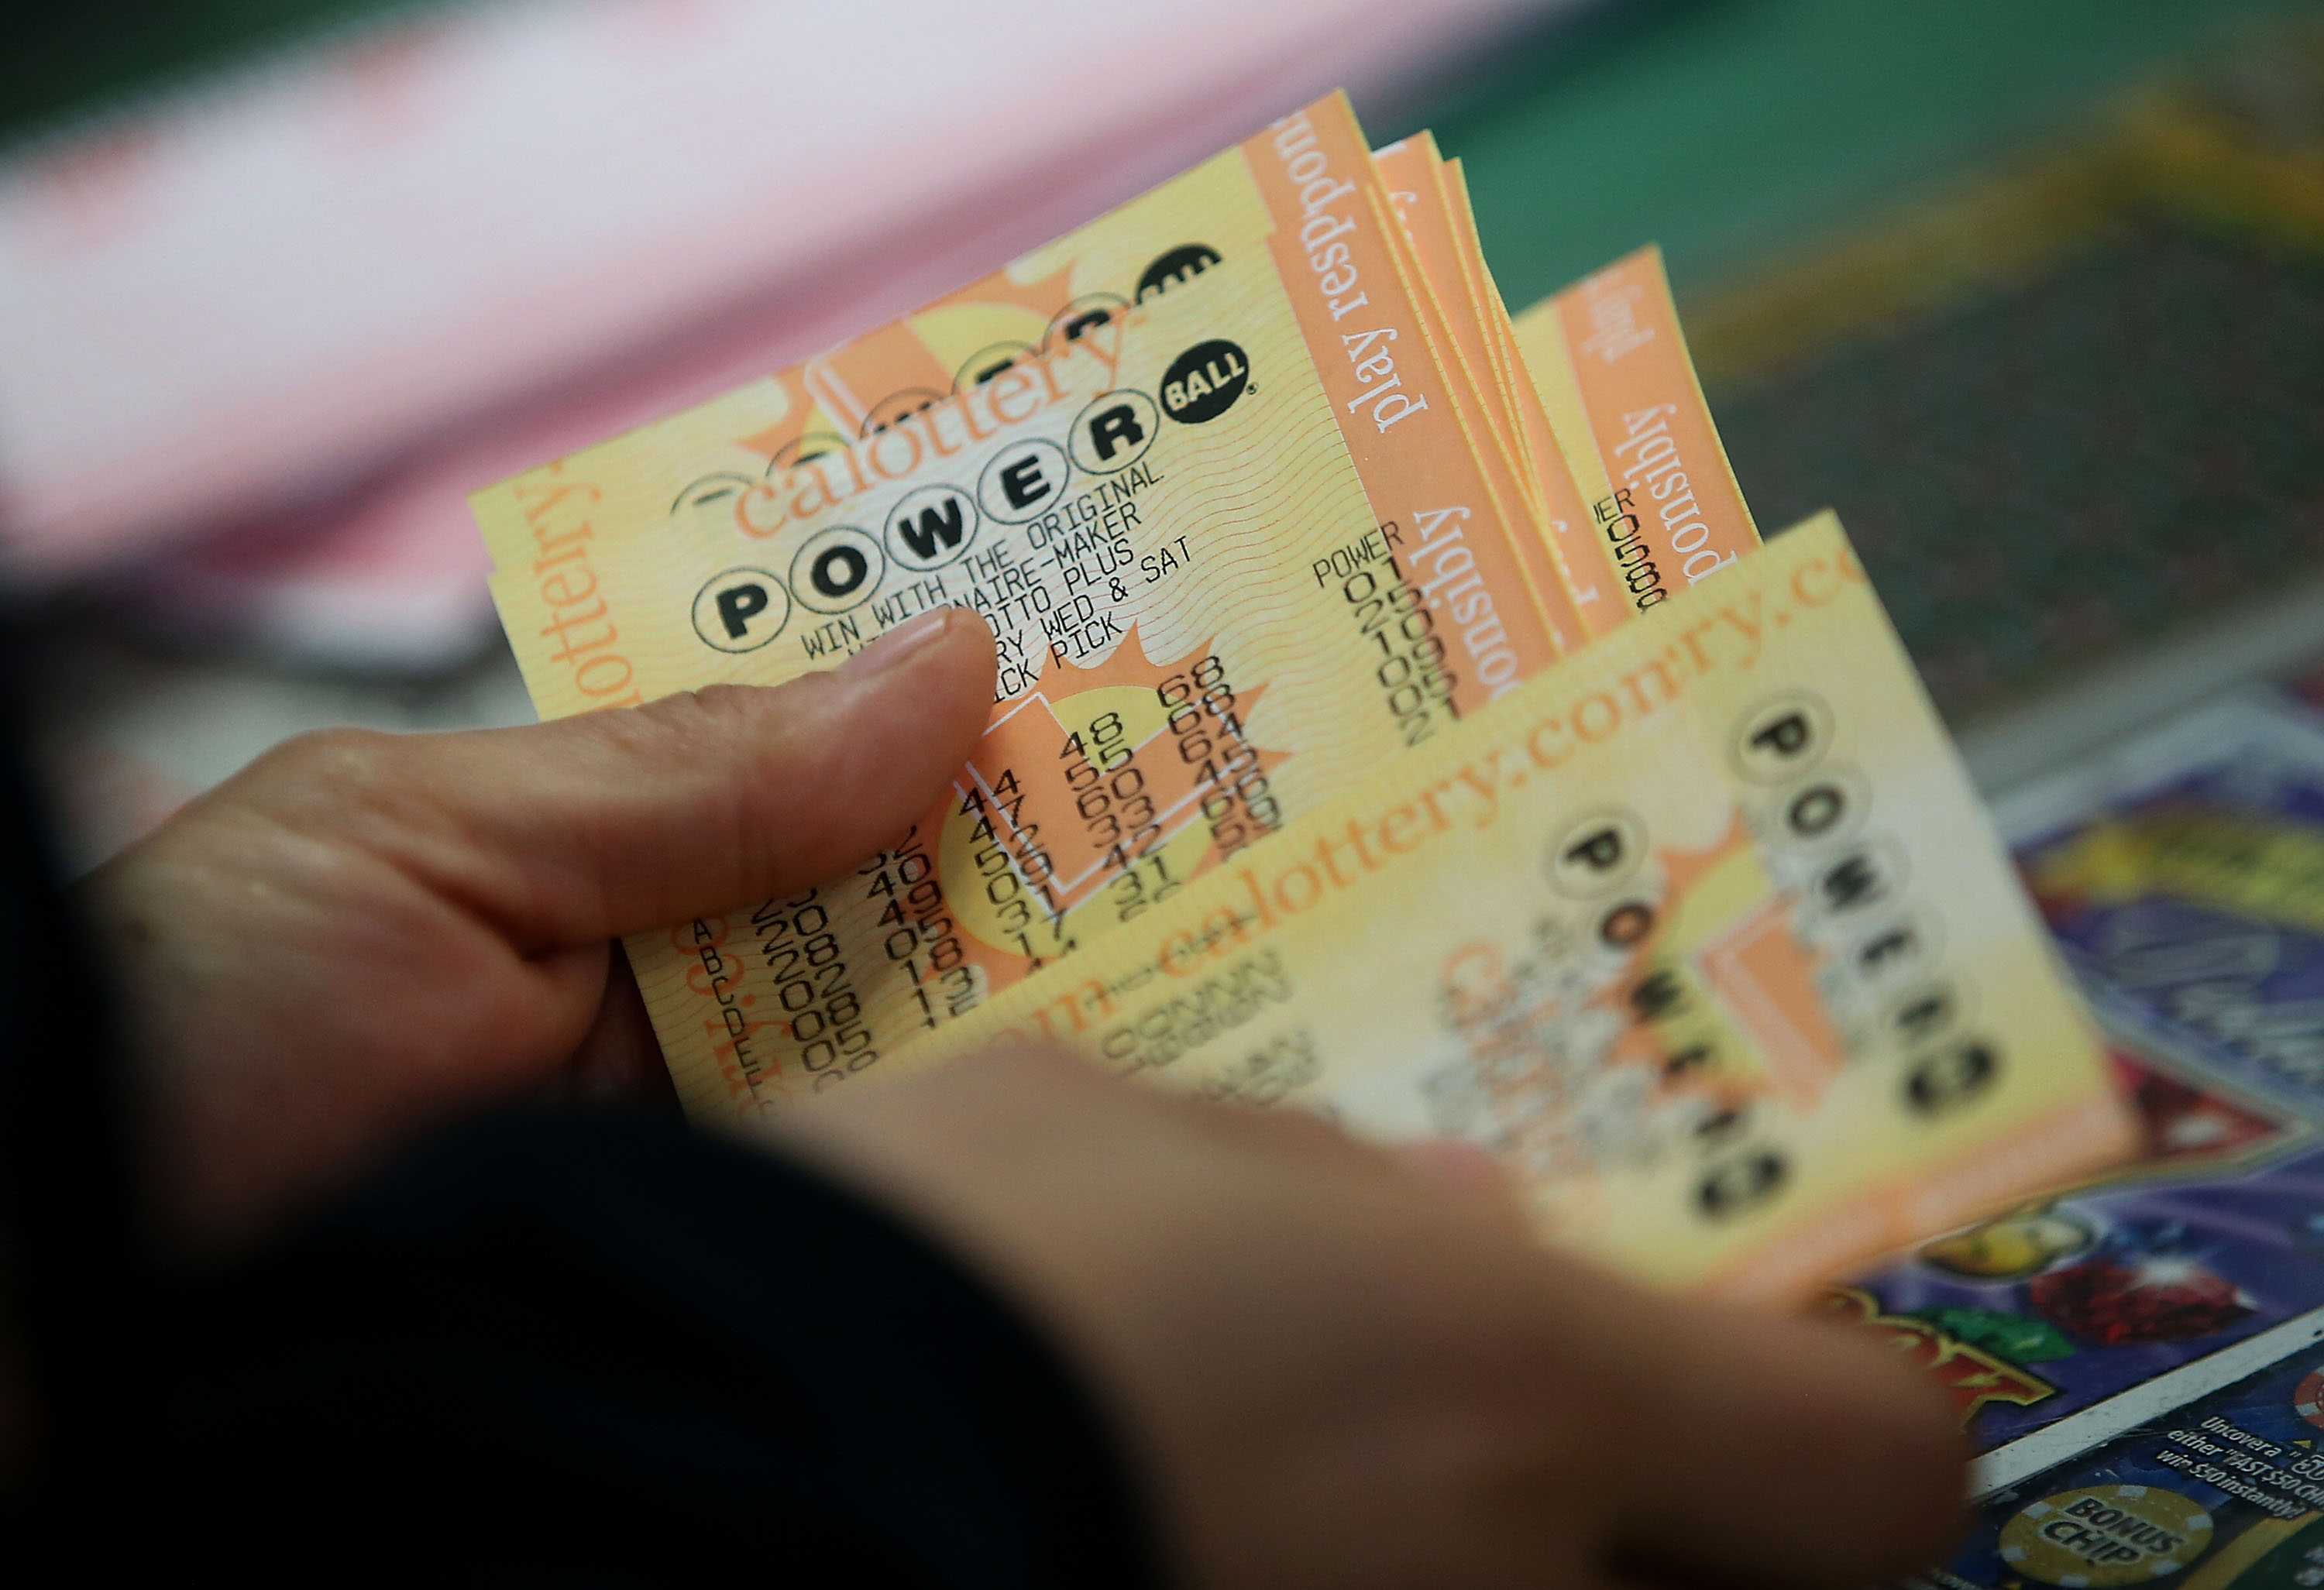 What Was the Biggest Powerball Jackpot in History?